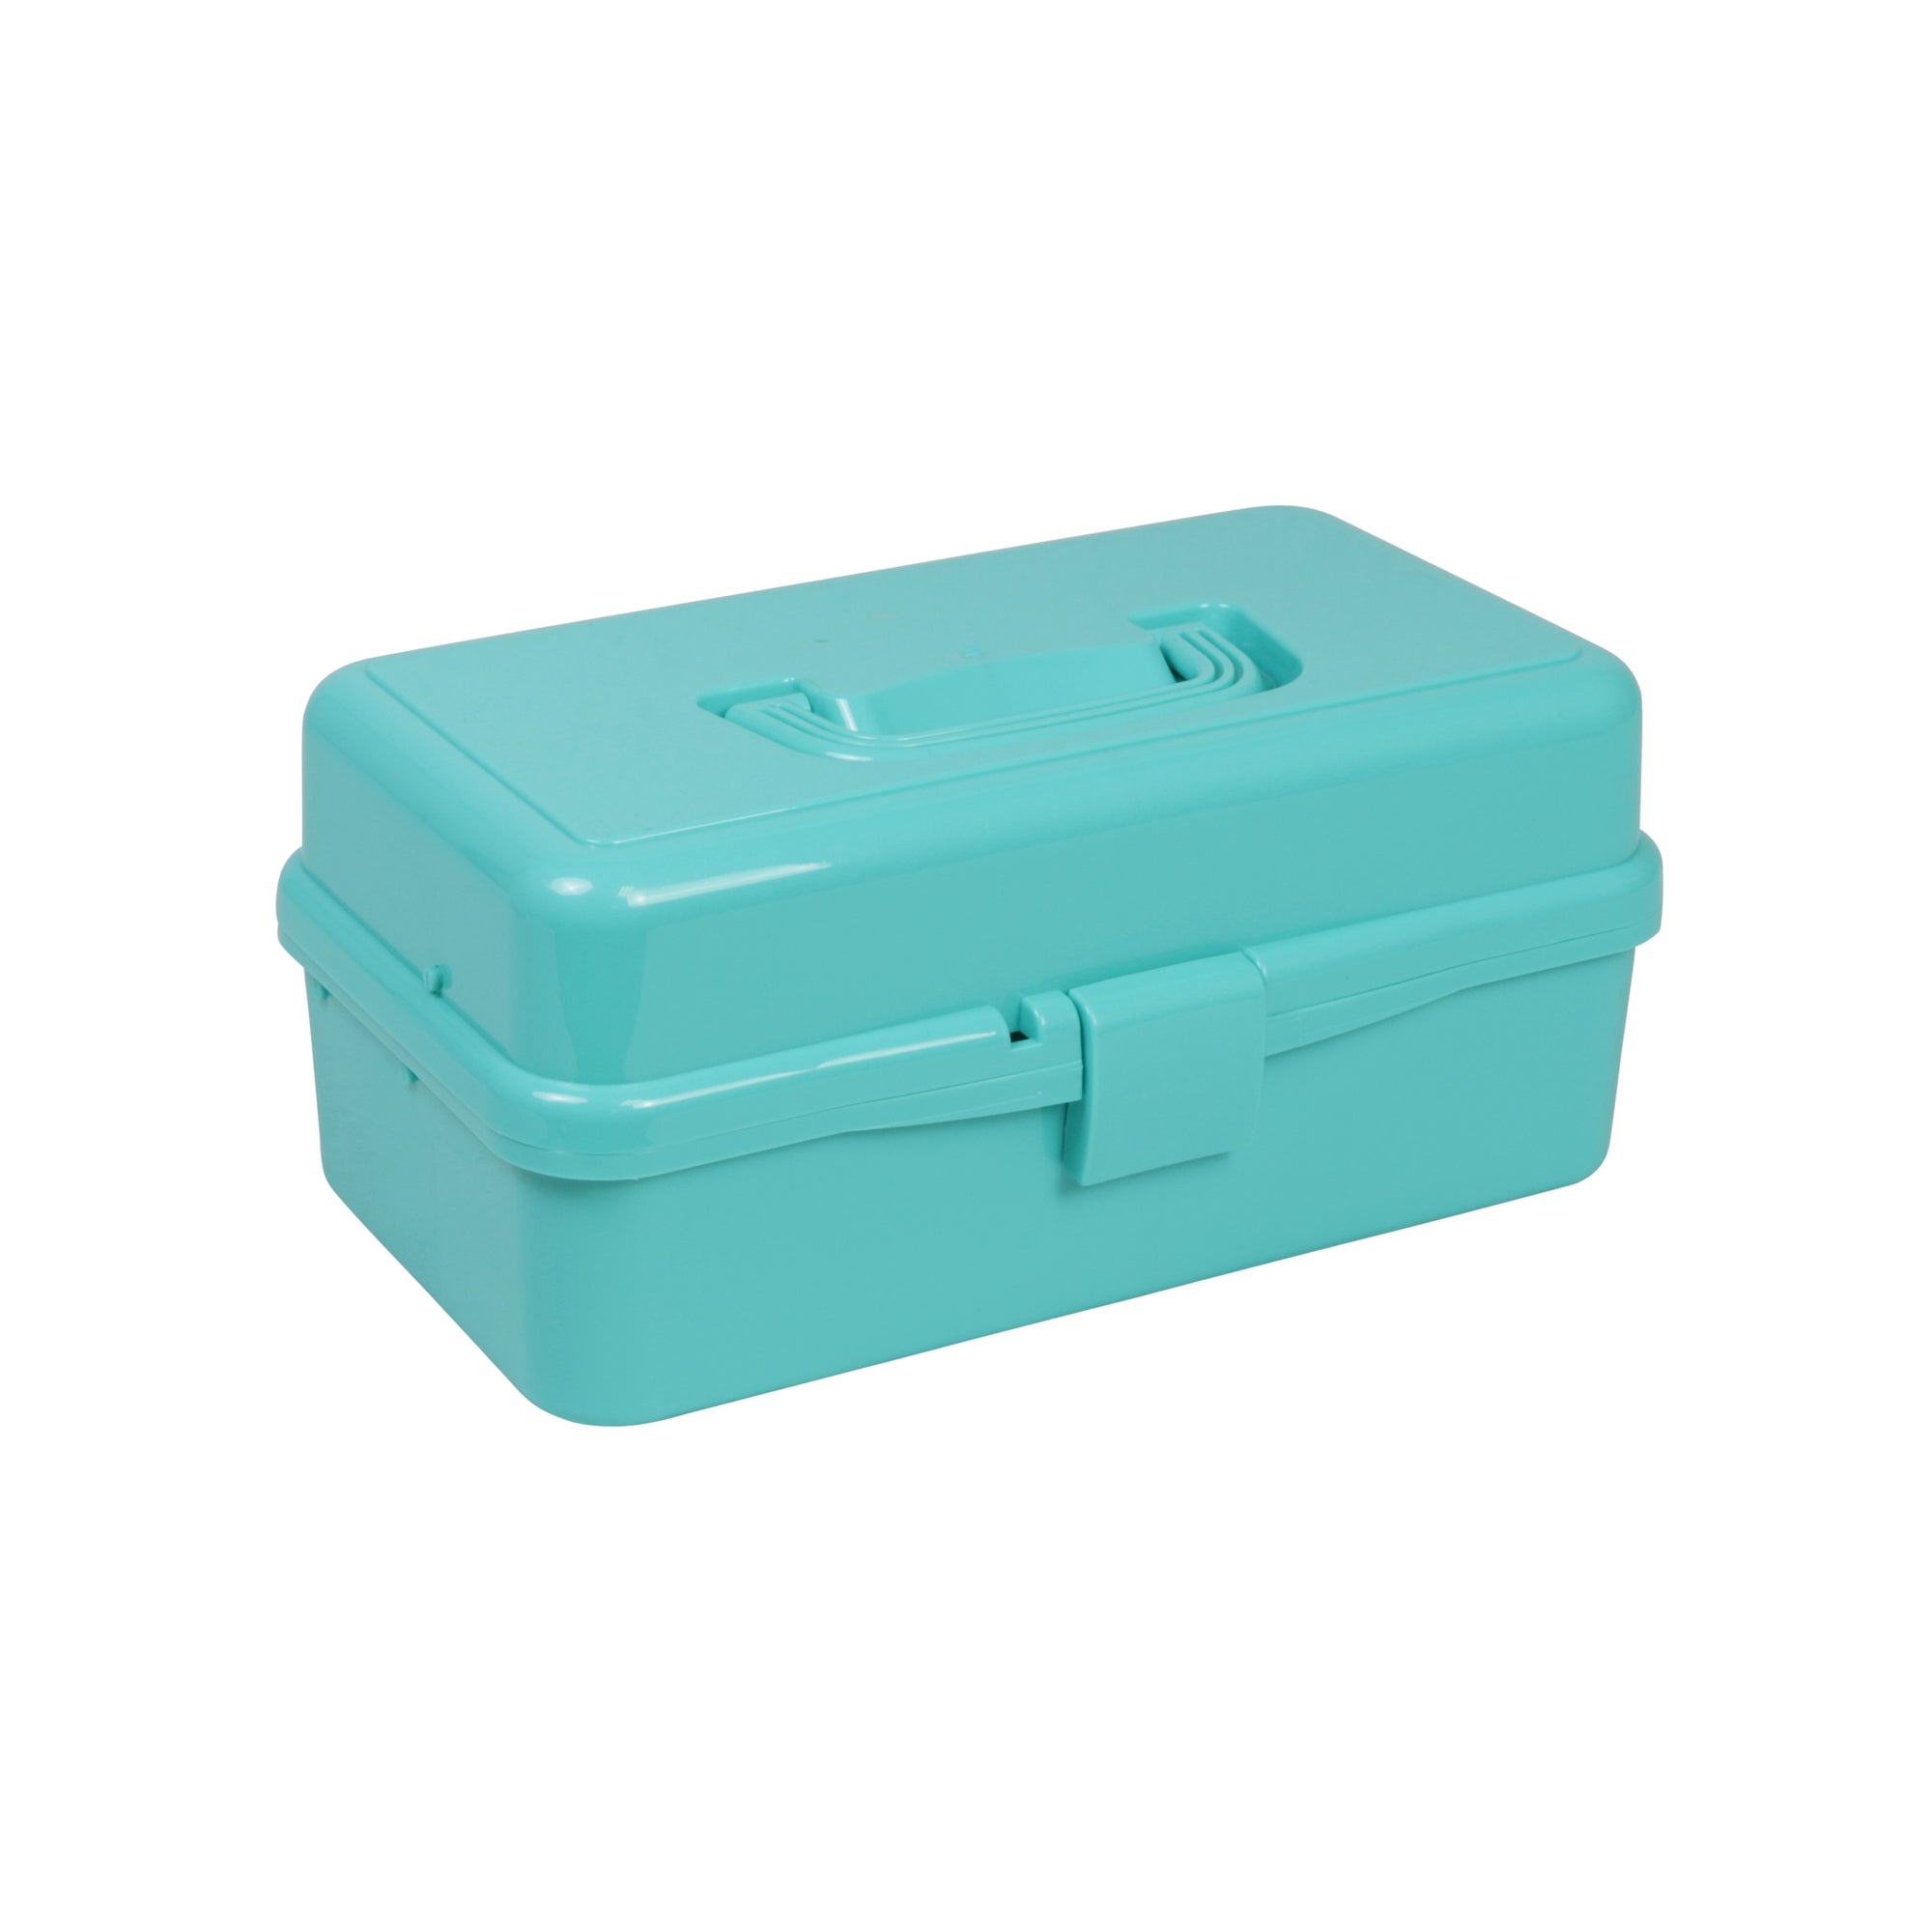 Art Craft Organizer Portable Sewing Box With Handle Portable 2 Layer Storage  Box With Lid For Cosmetic Art Craft Necklaces Blue